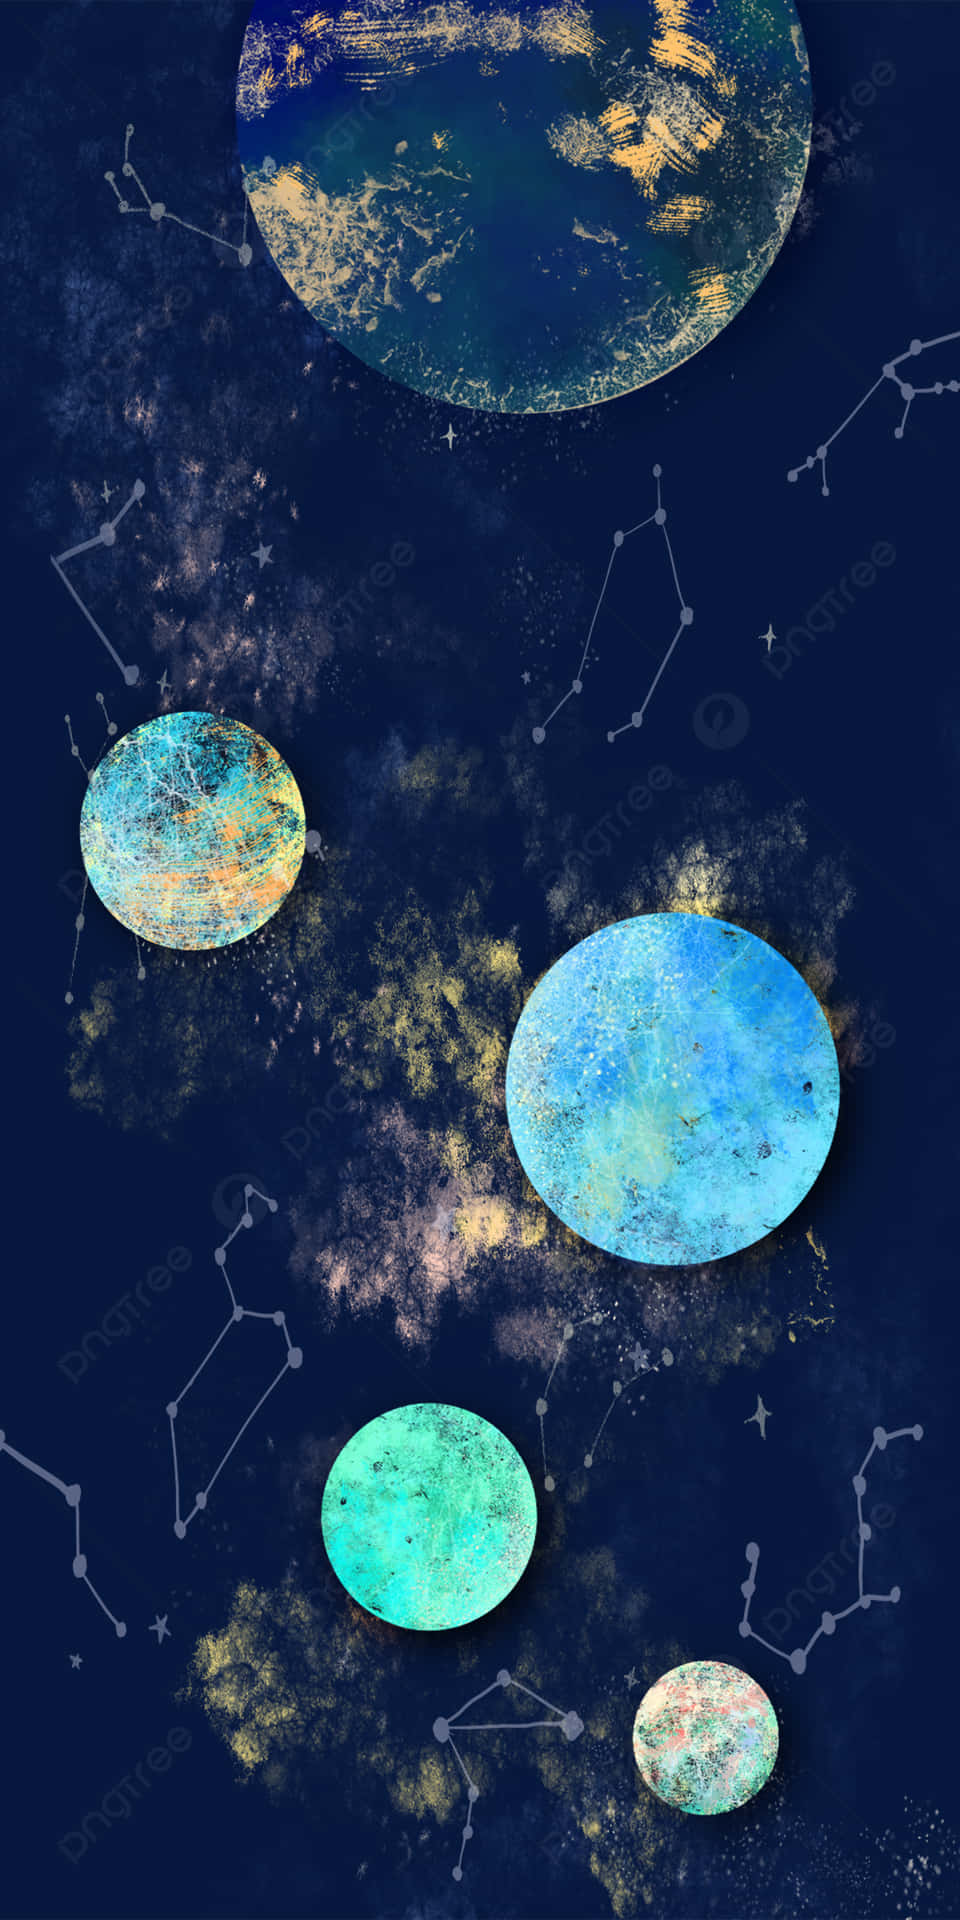 Visible Planets And Constellations Wallpaper